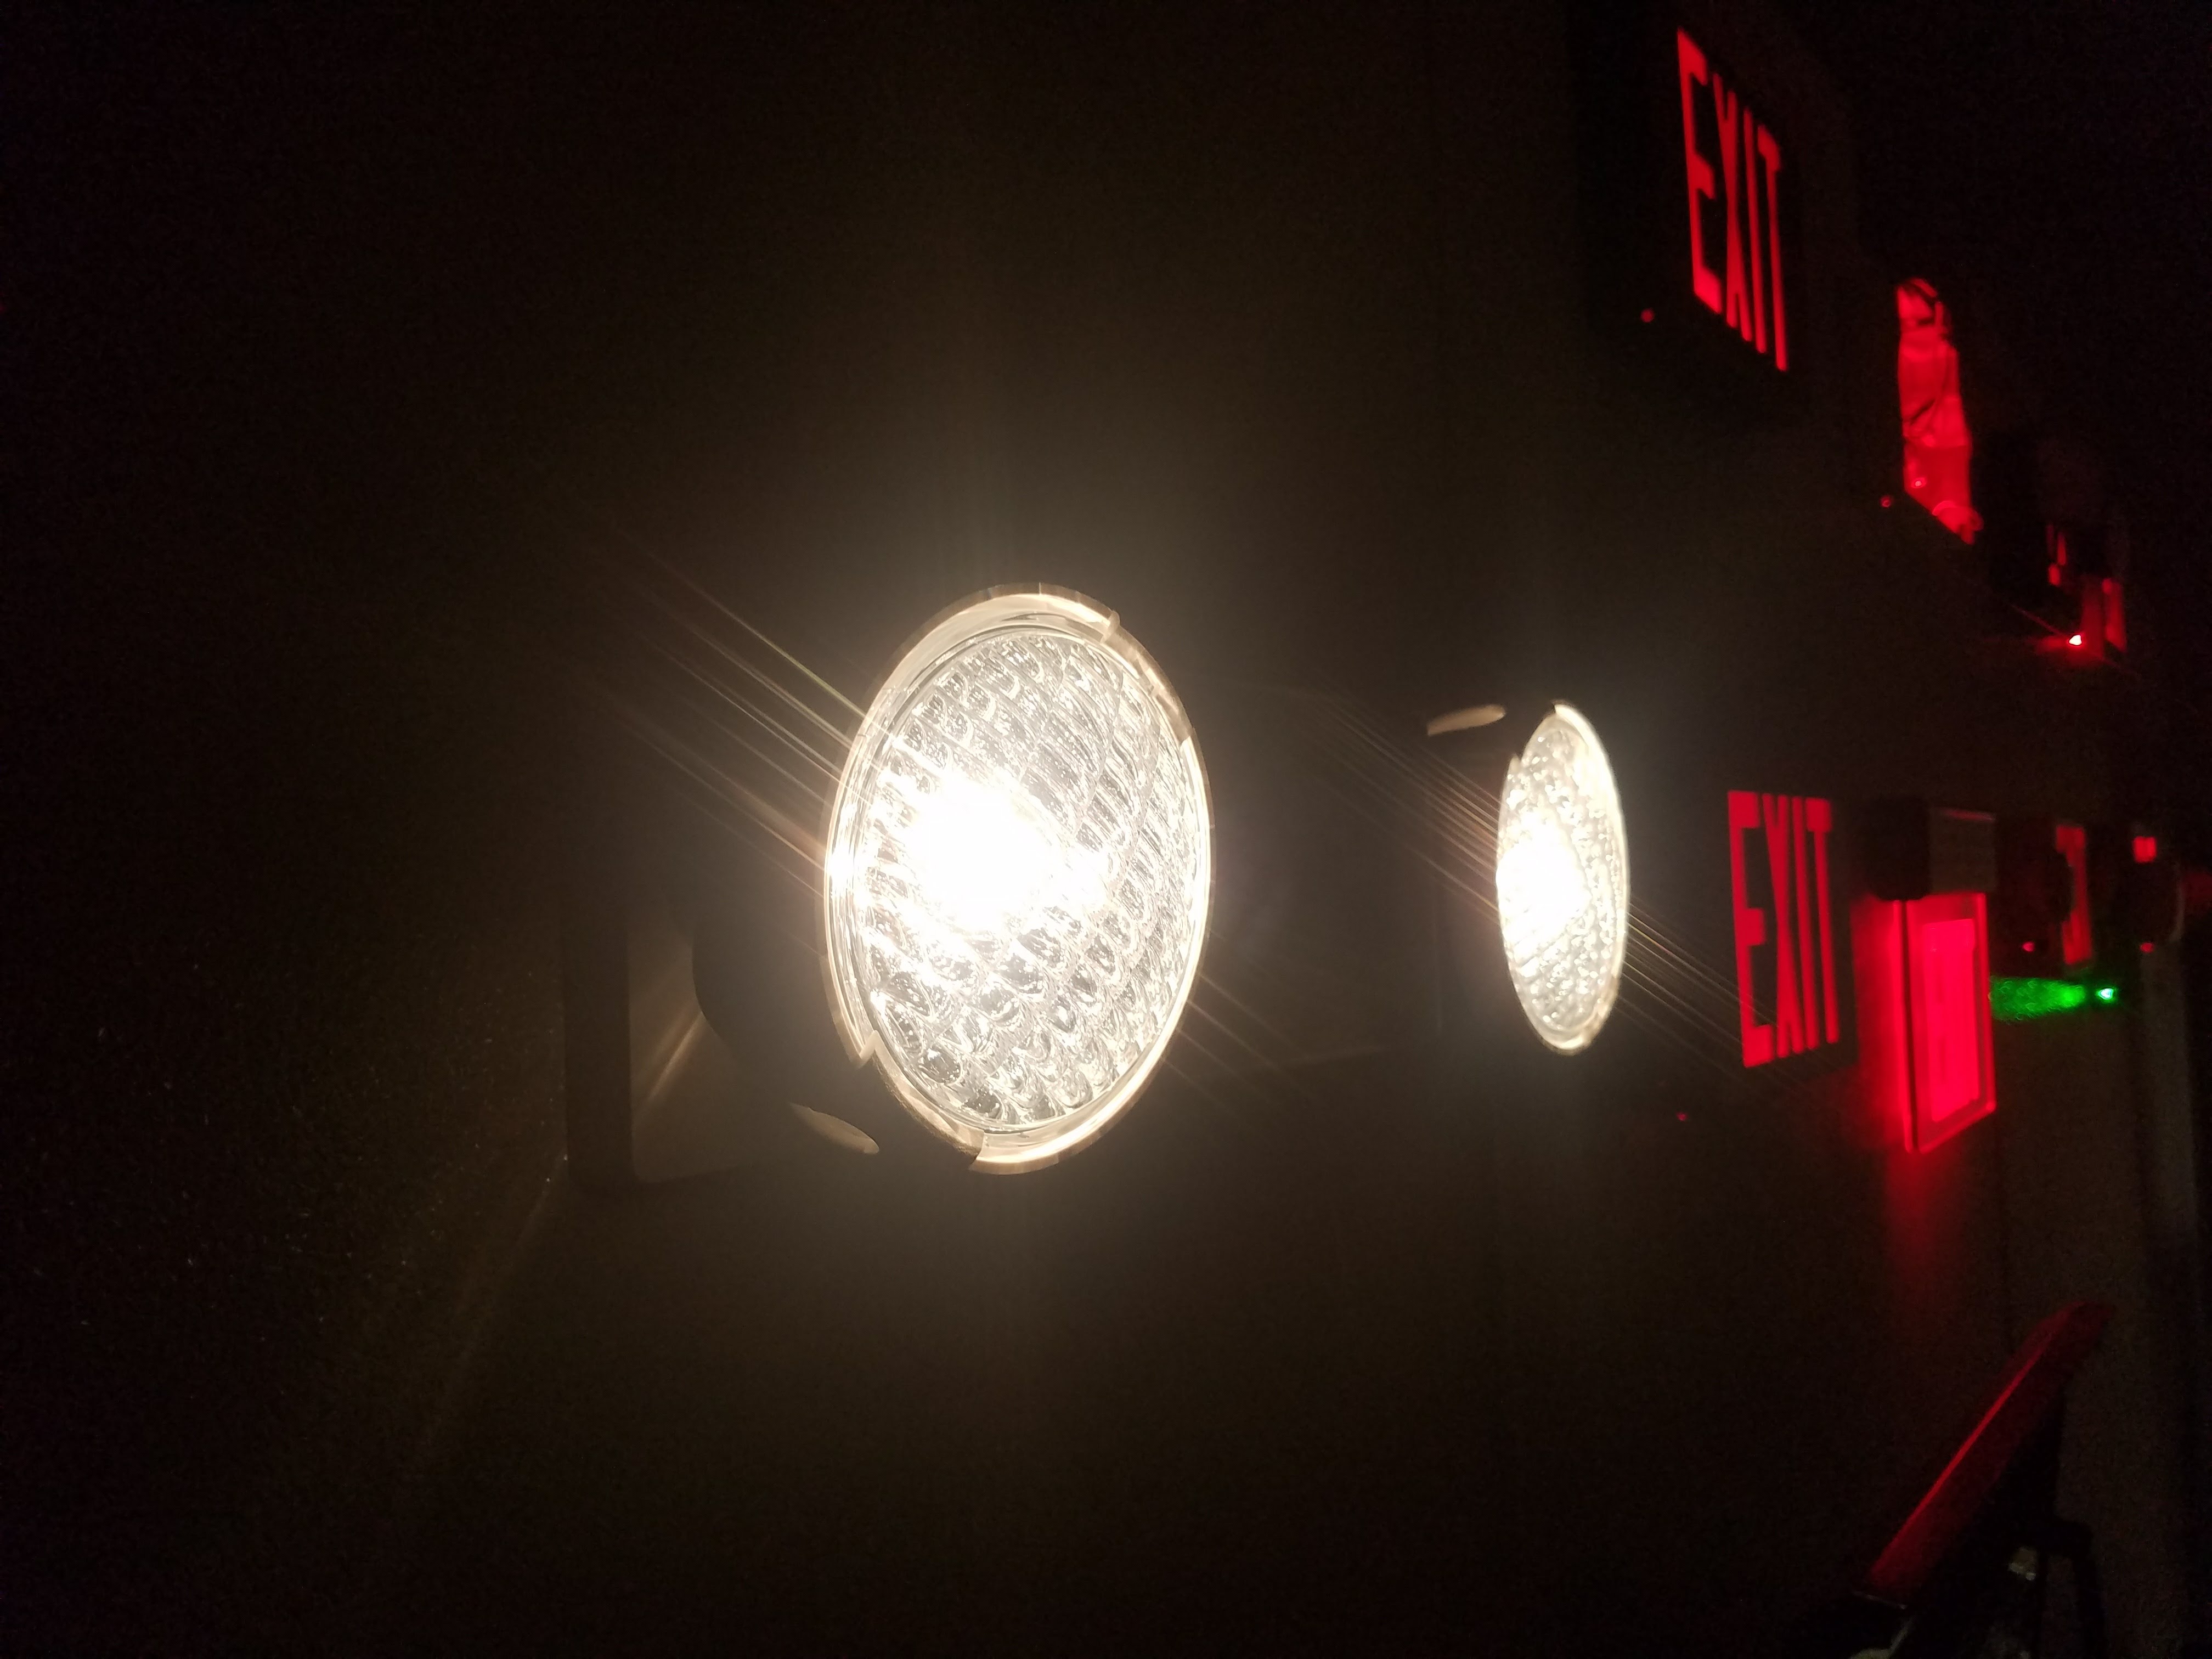 nfpa-101-section-7-9-requirements-for-emergency-lighting-systems